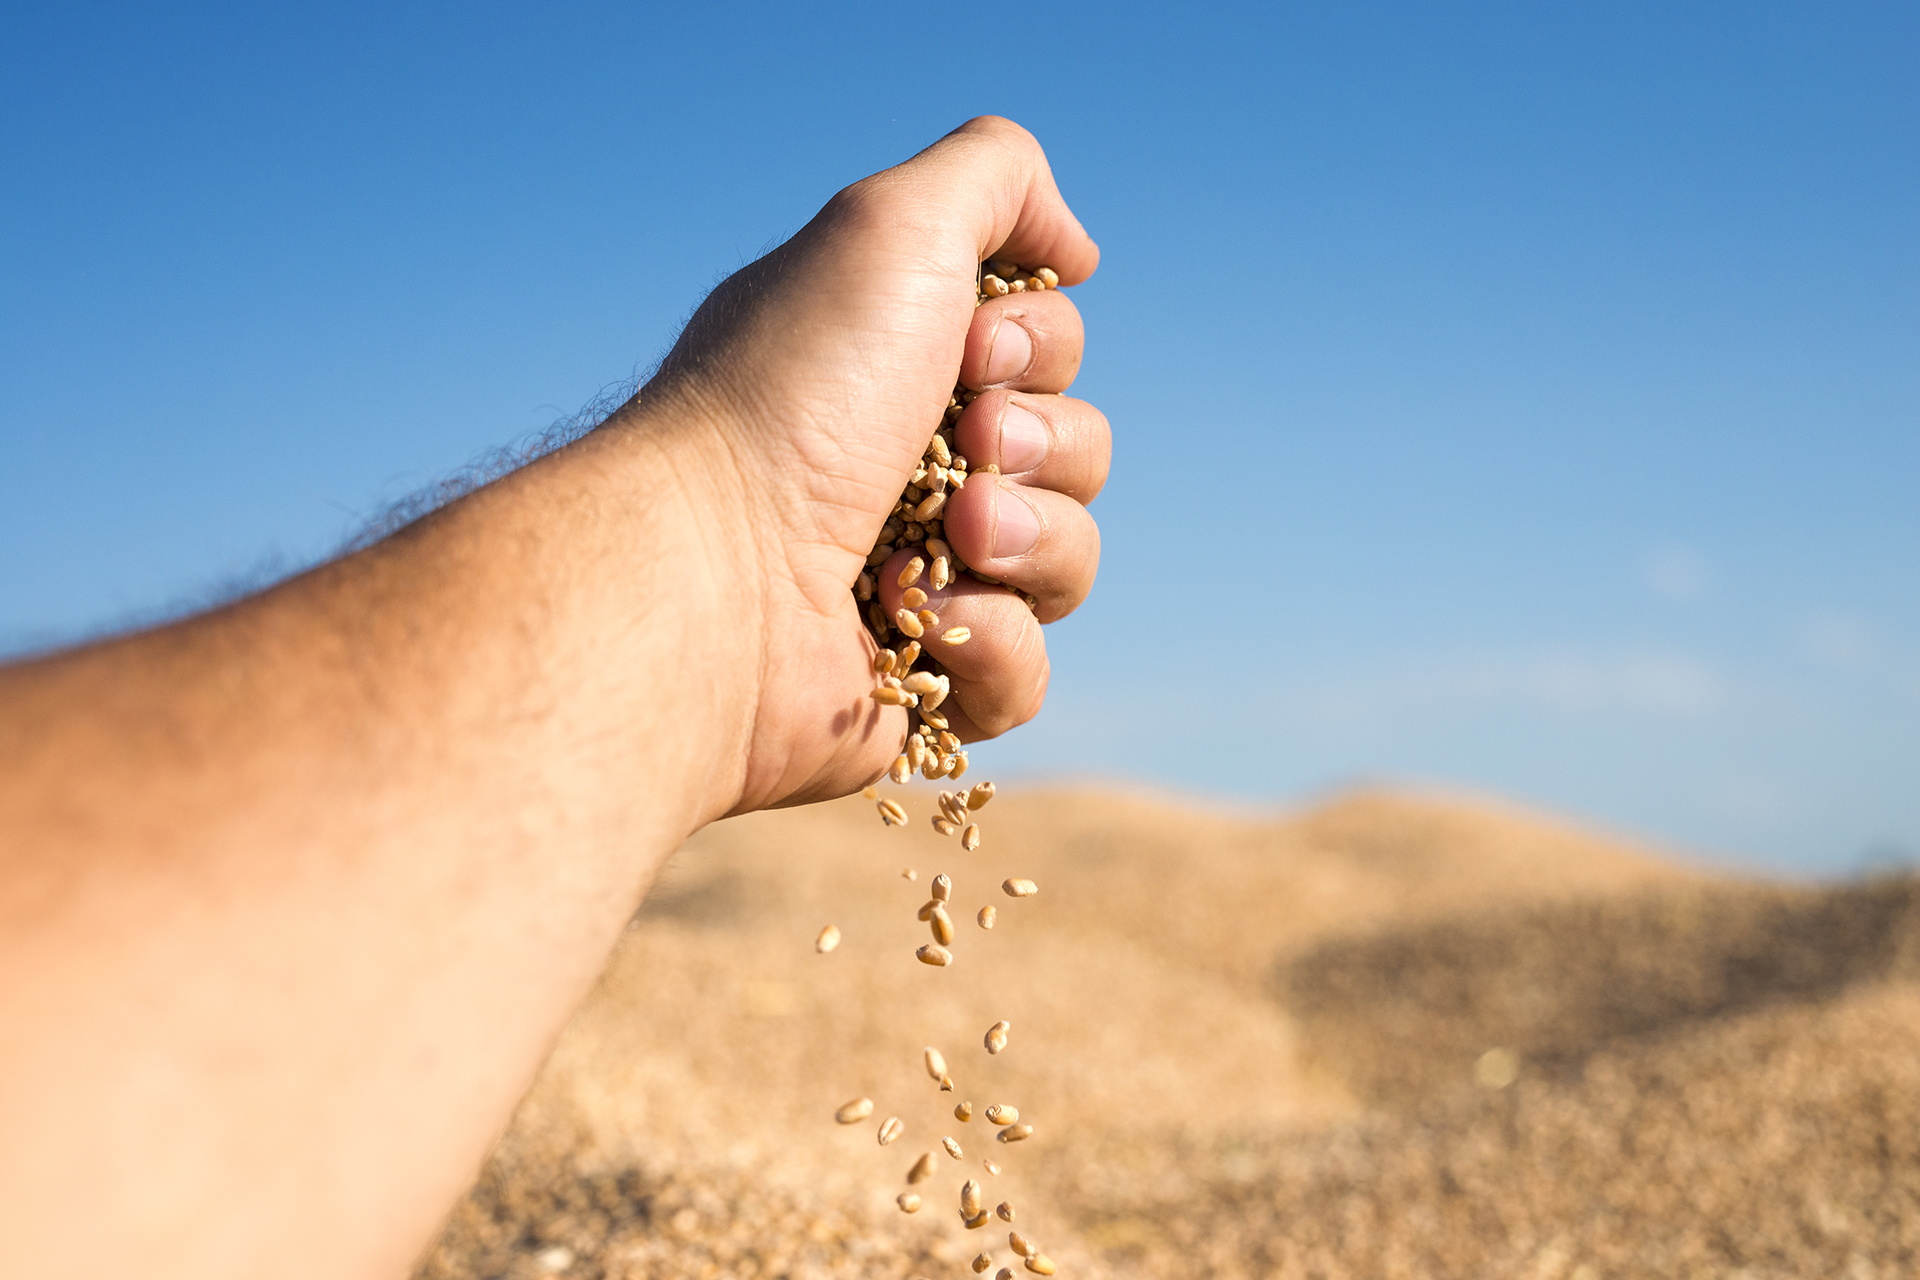 Wheat seeds pouring out of hand representing good yields and successful harvest.